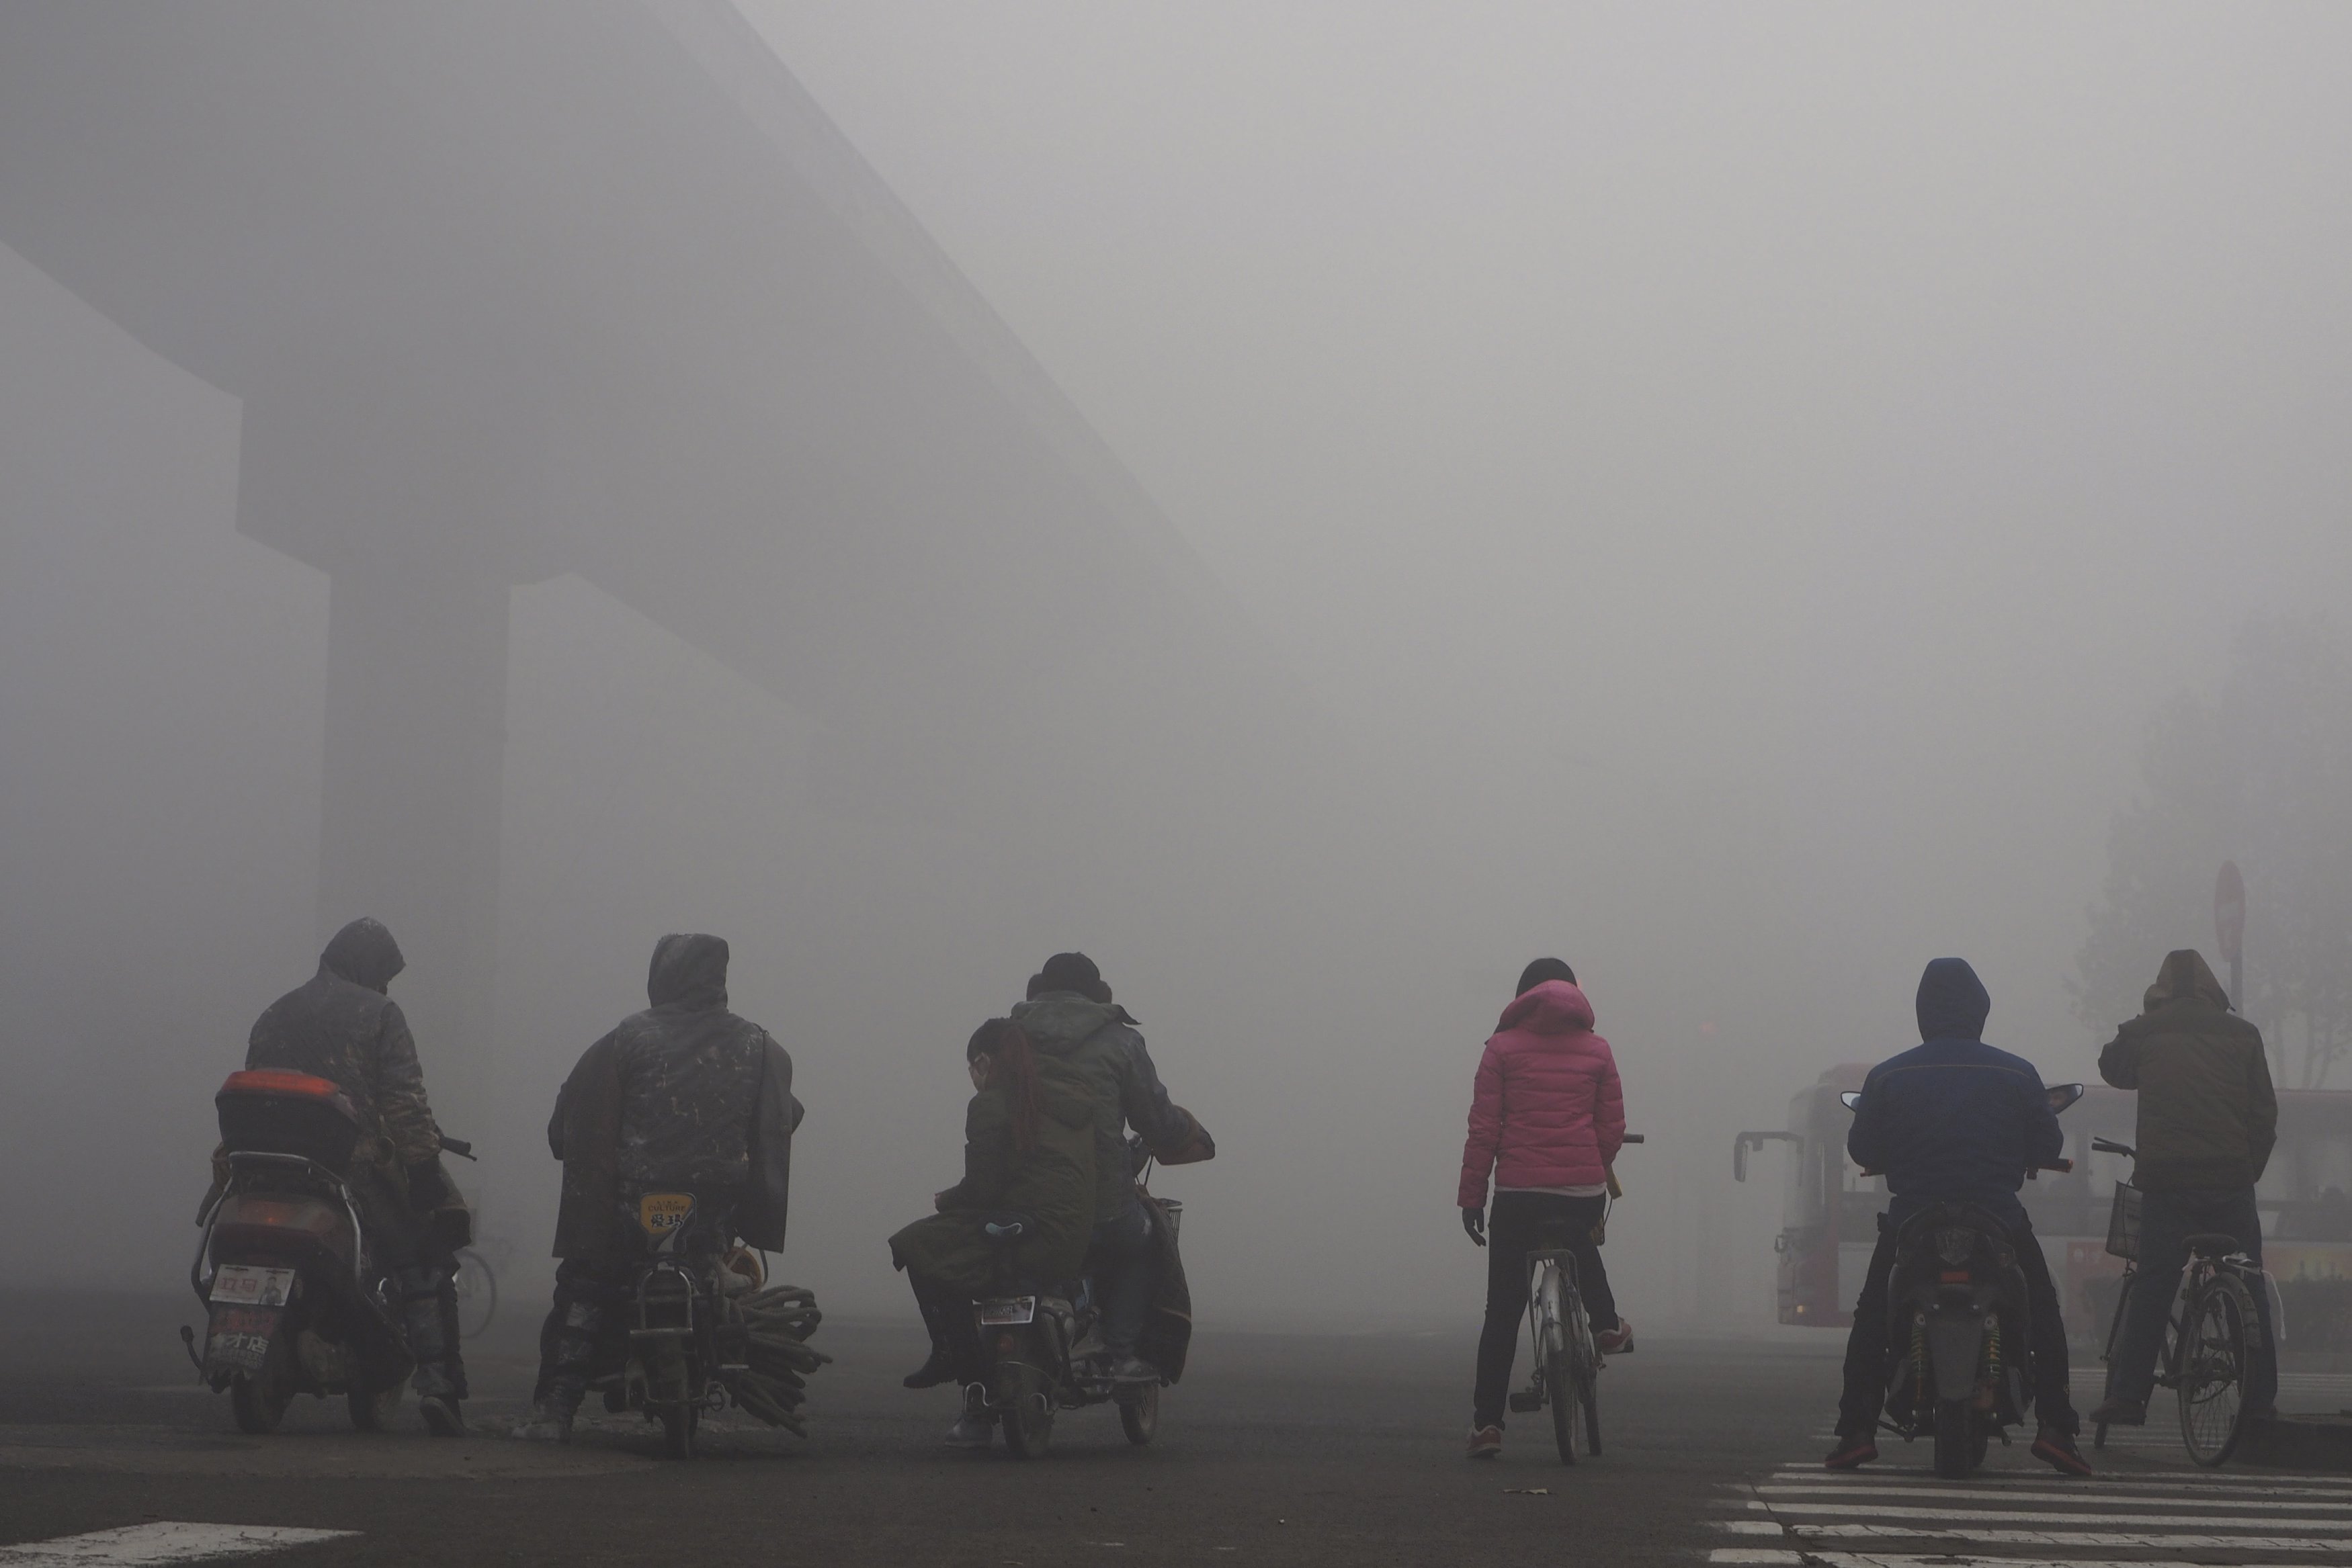 Residents on their bicycles and electric bikes wait for the traffic at an intersection amid heavy smog in Shijiazhuang, Hebei province, China, December 10, 2015. Picture taken December 10, 2015. REUTERS/Stringer ATTENTION EDITORS - THIS PICTURE WAS PROVIDED BY A THIRD PARTY. THIS PICTURE IS DISTRIBUTED EXACTLY AS RECEIVED BY REUTERS, AS A SERVICE TO CLIENTS. CHINA OUT. NO COMMERCIAL OR EDITORIAL SALES IN CHINA.